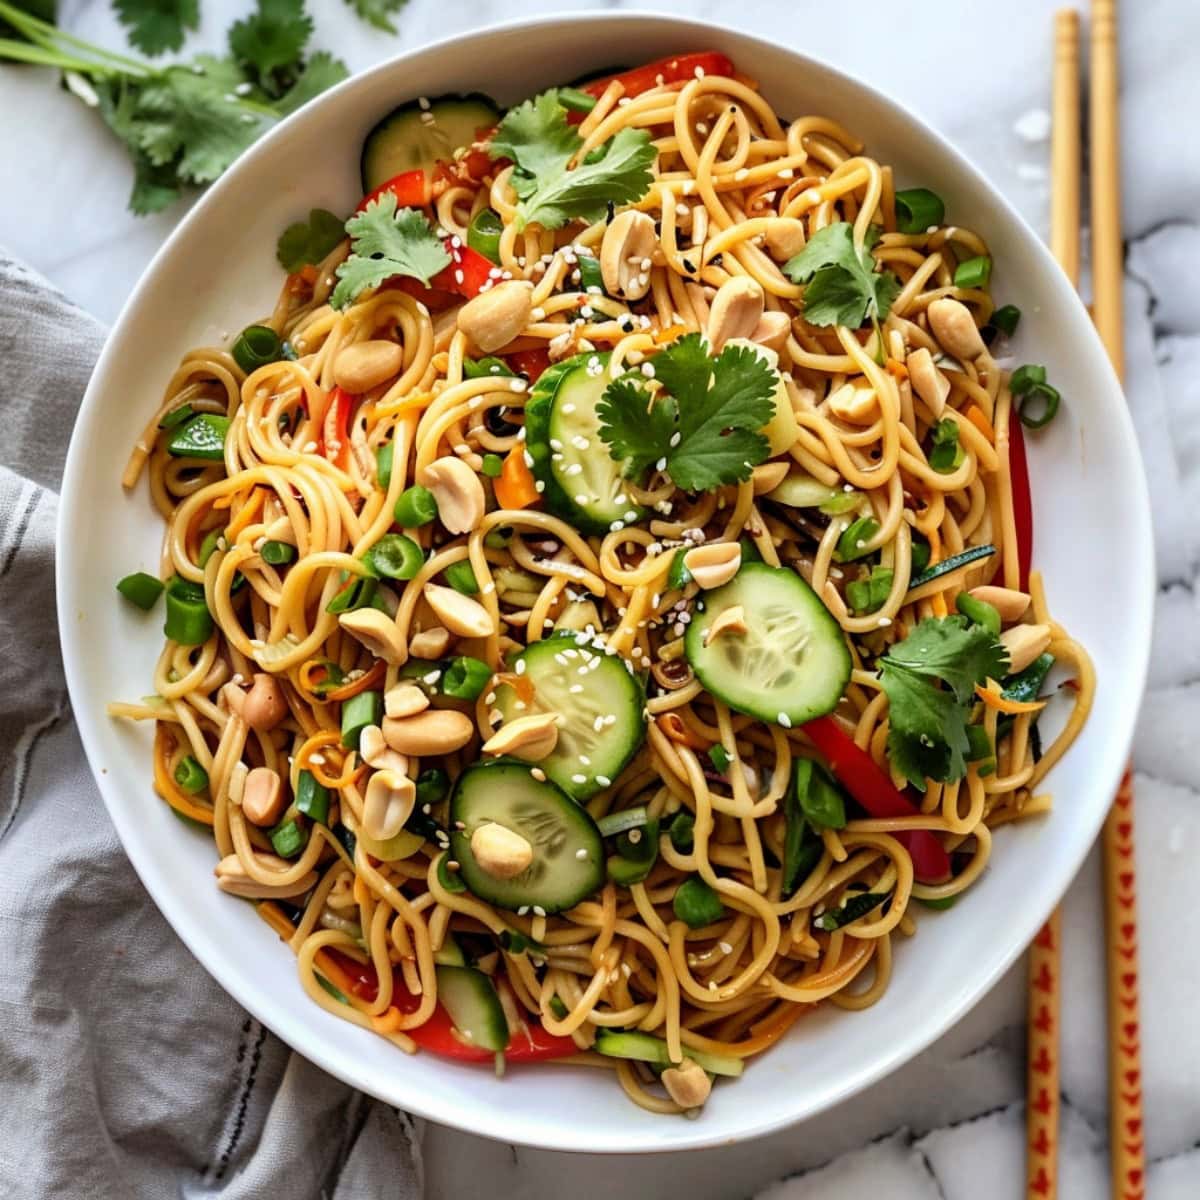 Elegant Asian noodle salad garnished with chopped peanuts, fresh cilantro, cucumber and carrots.